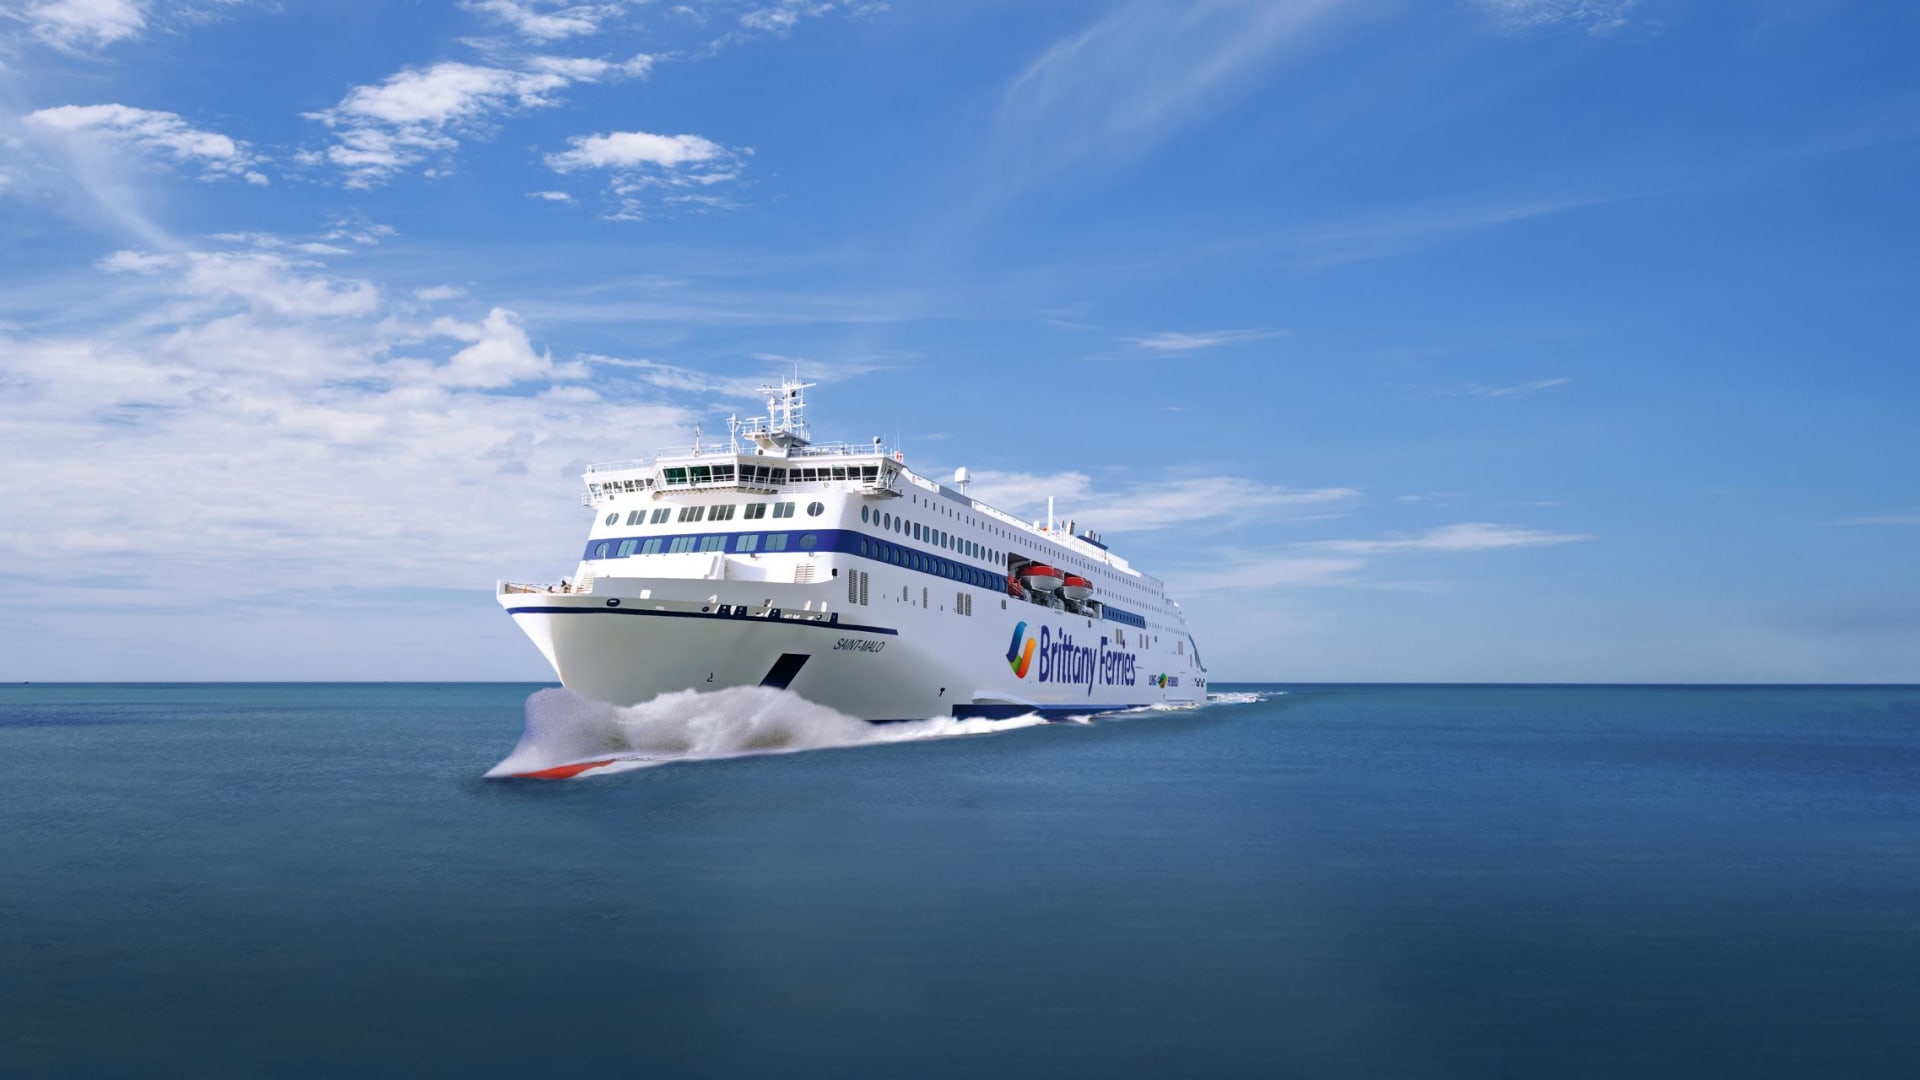 World’s largest hybrid ship to ferry passengers between UK, France